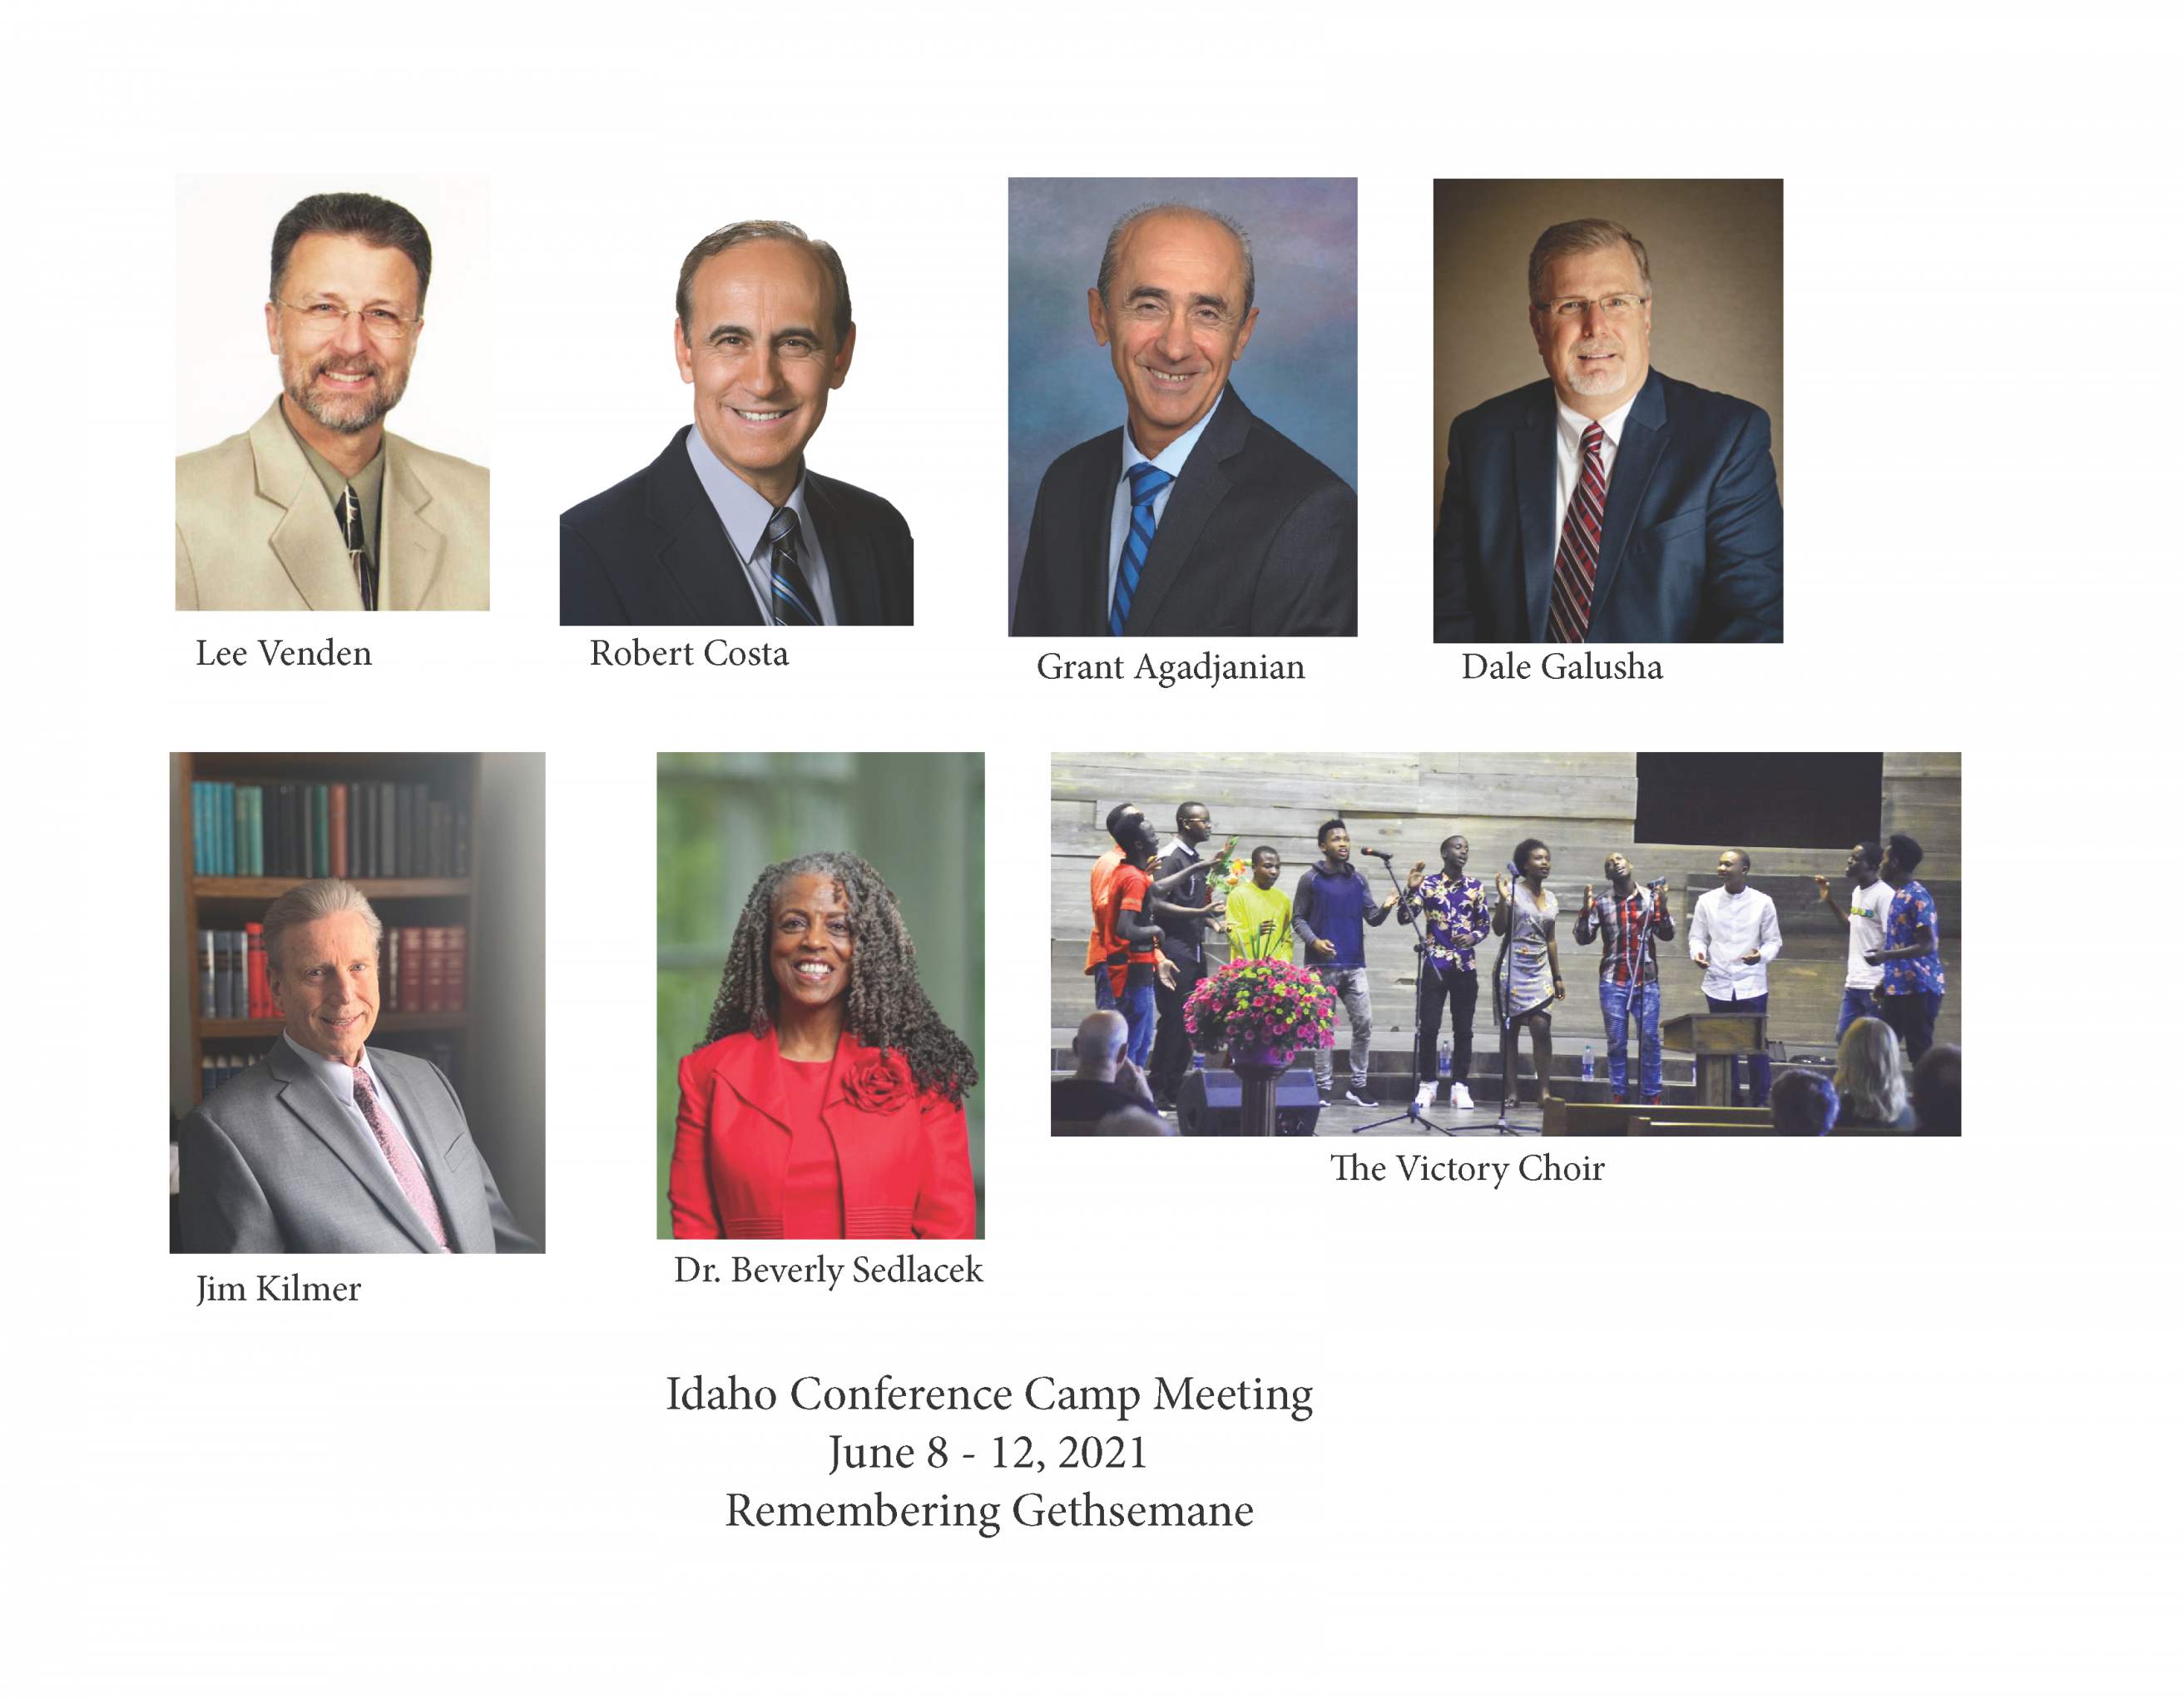 Idaho Conference Camp Meeting Speaker portraits